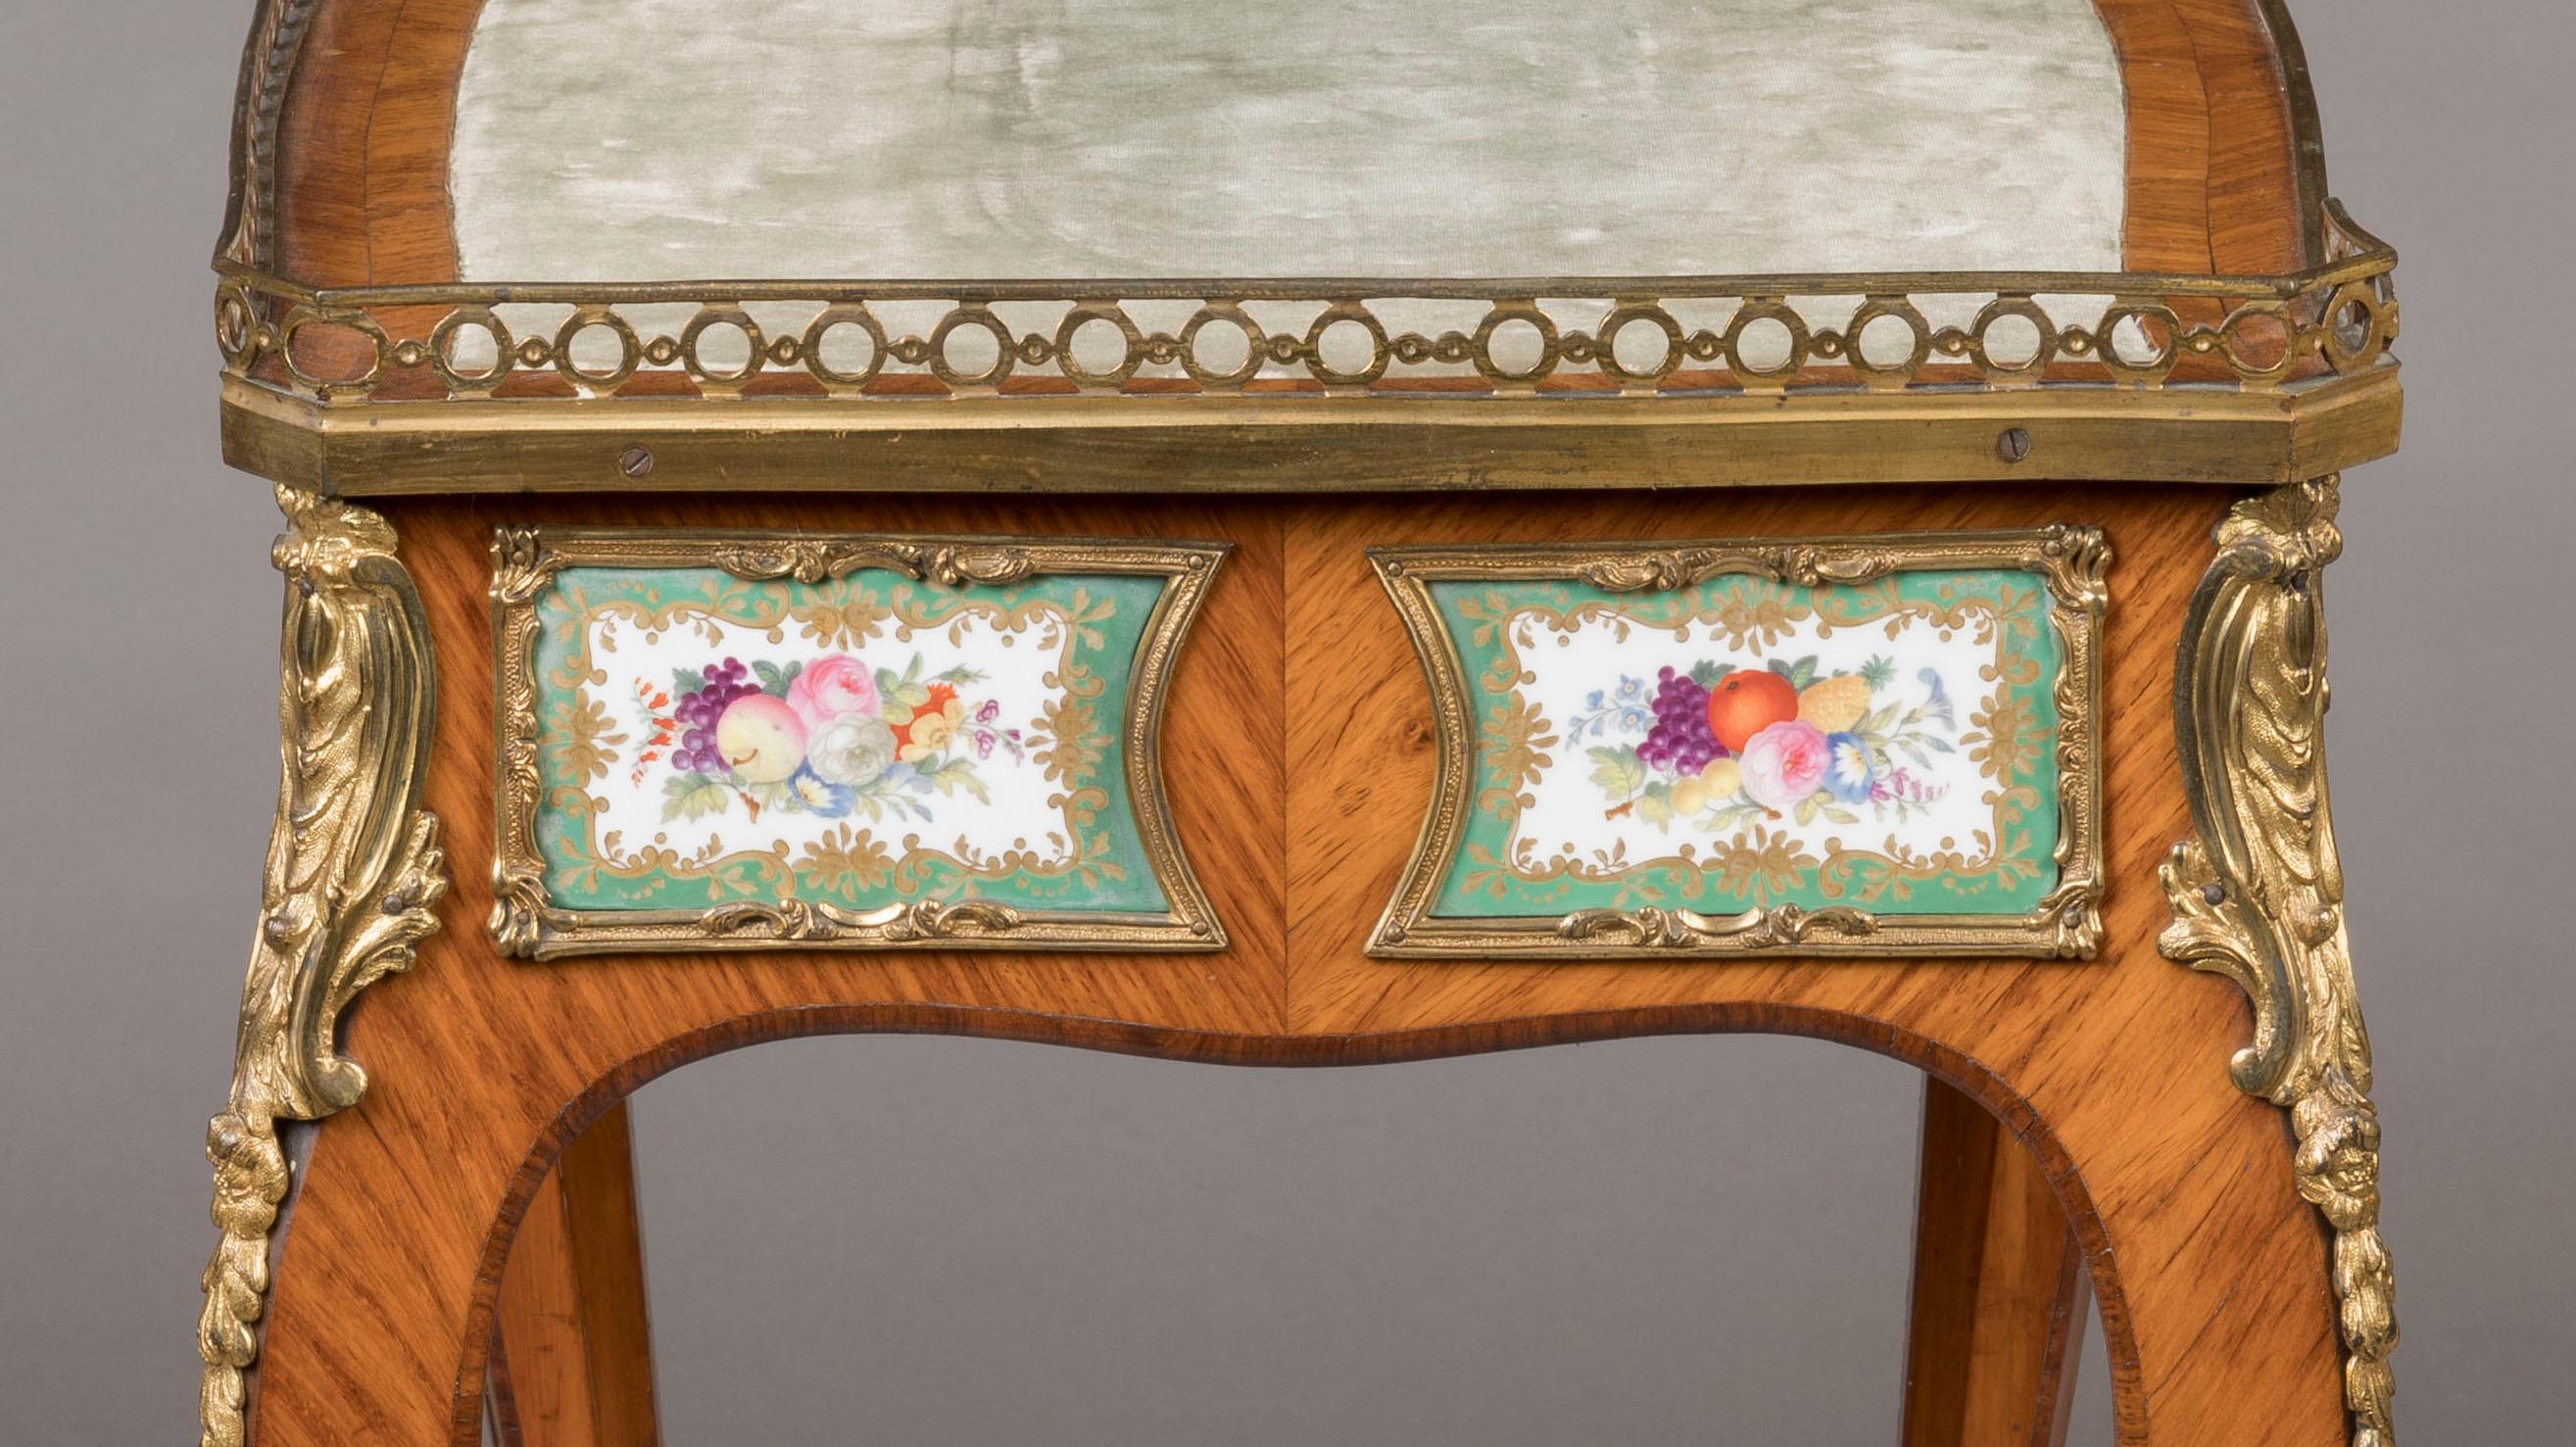 19th Century French Porcelain-Mounted Occasional Table in the Louis XV/XVI Style For Sale 2